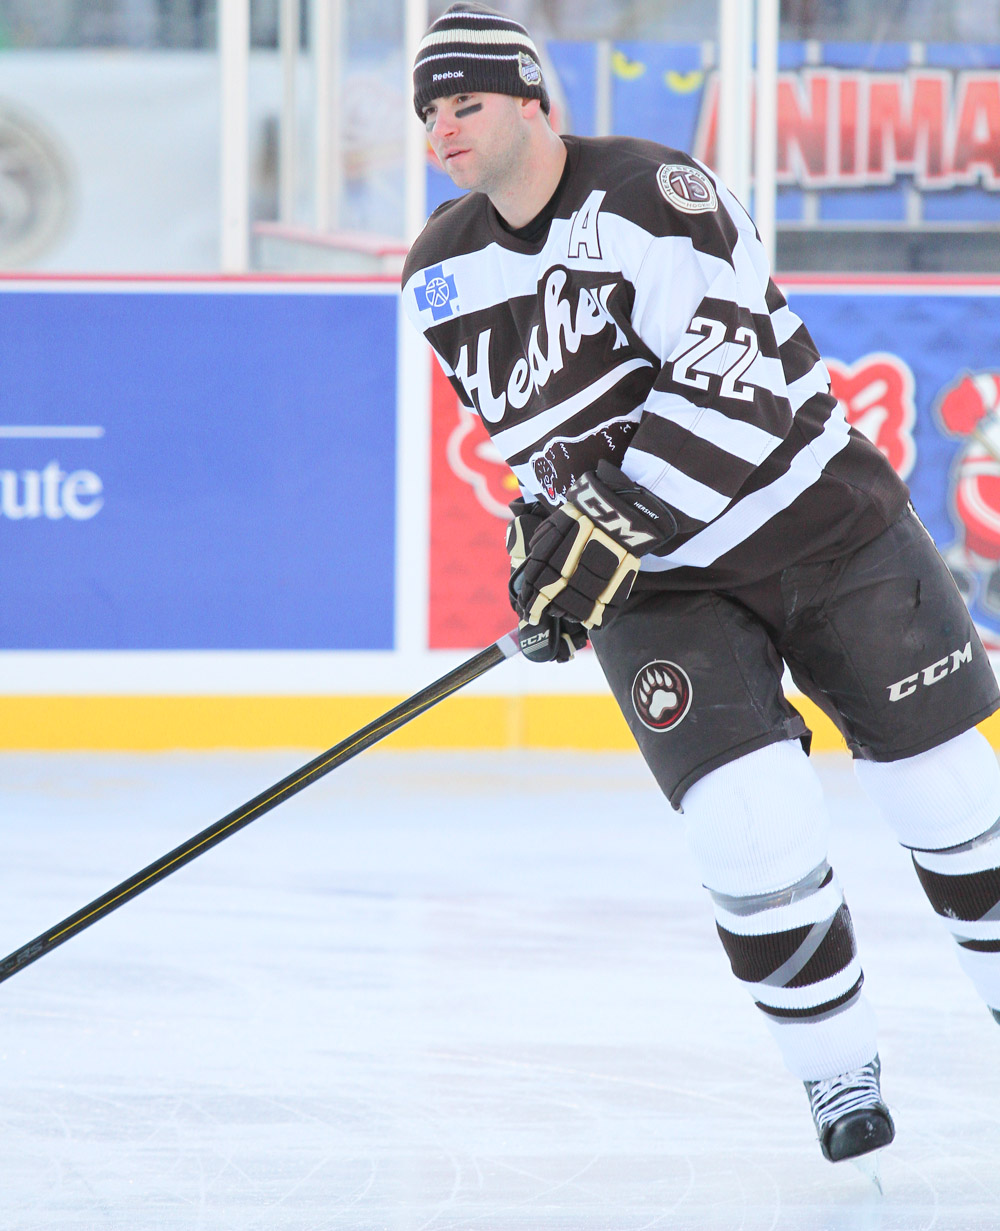 A Look the Hershey Bears' Outdoor Classic Jerseys